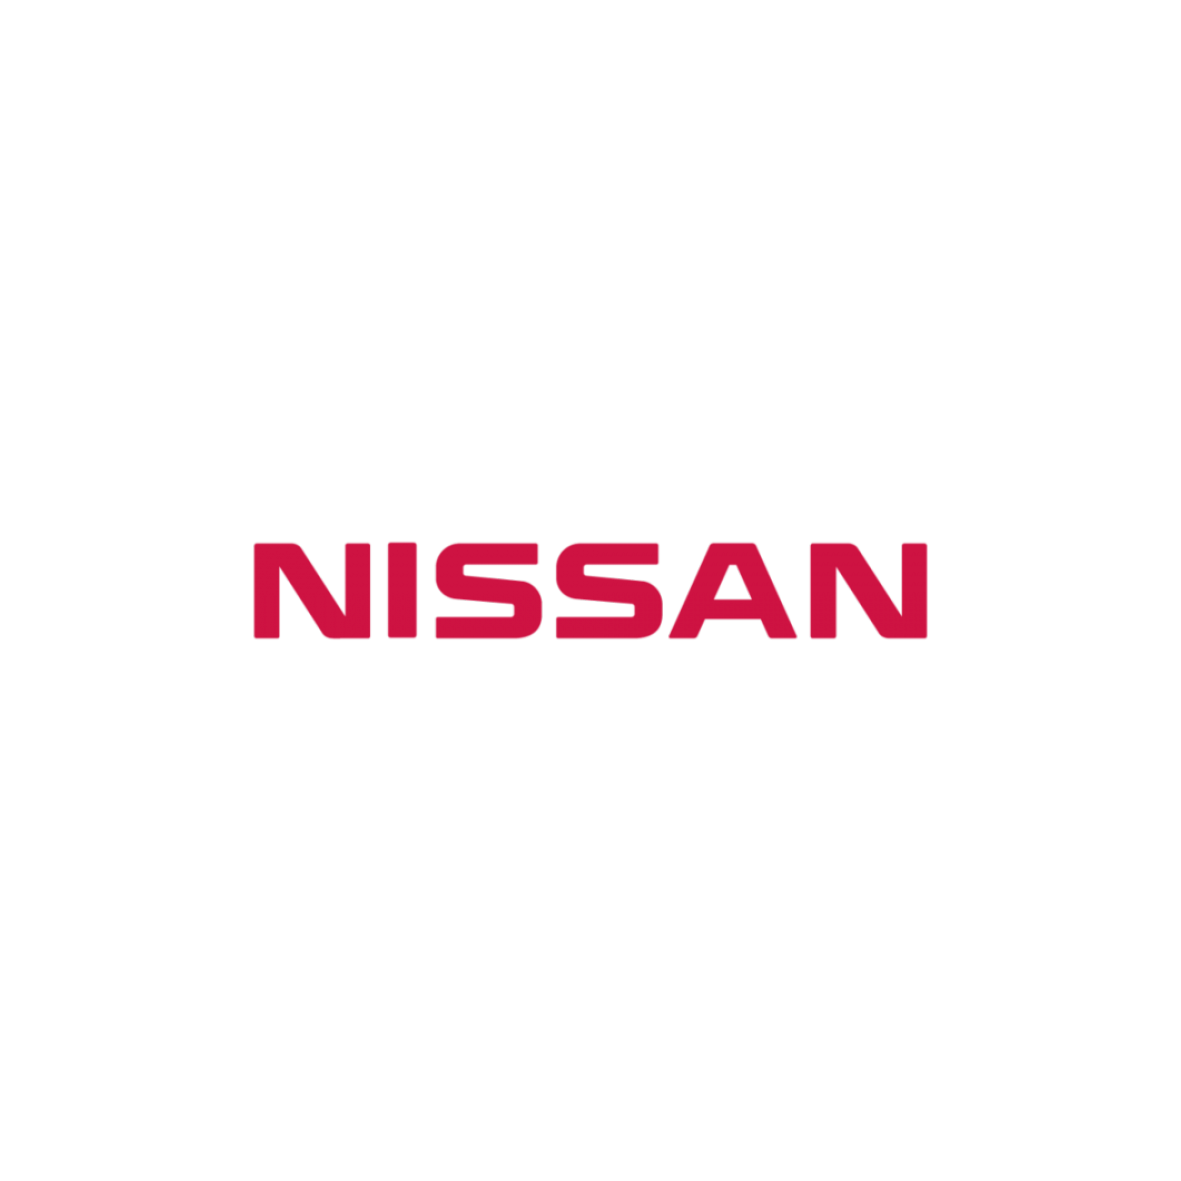 NISSAN.png